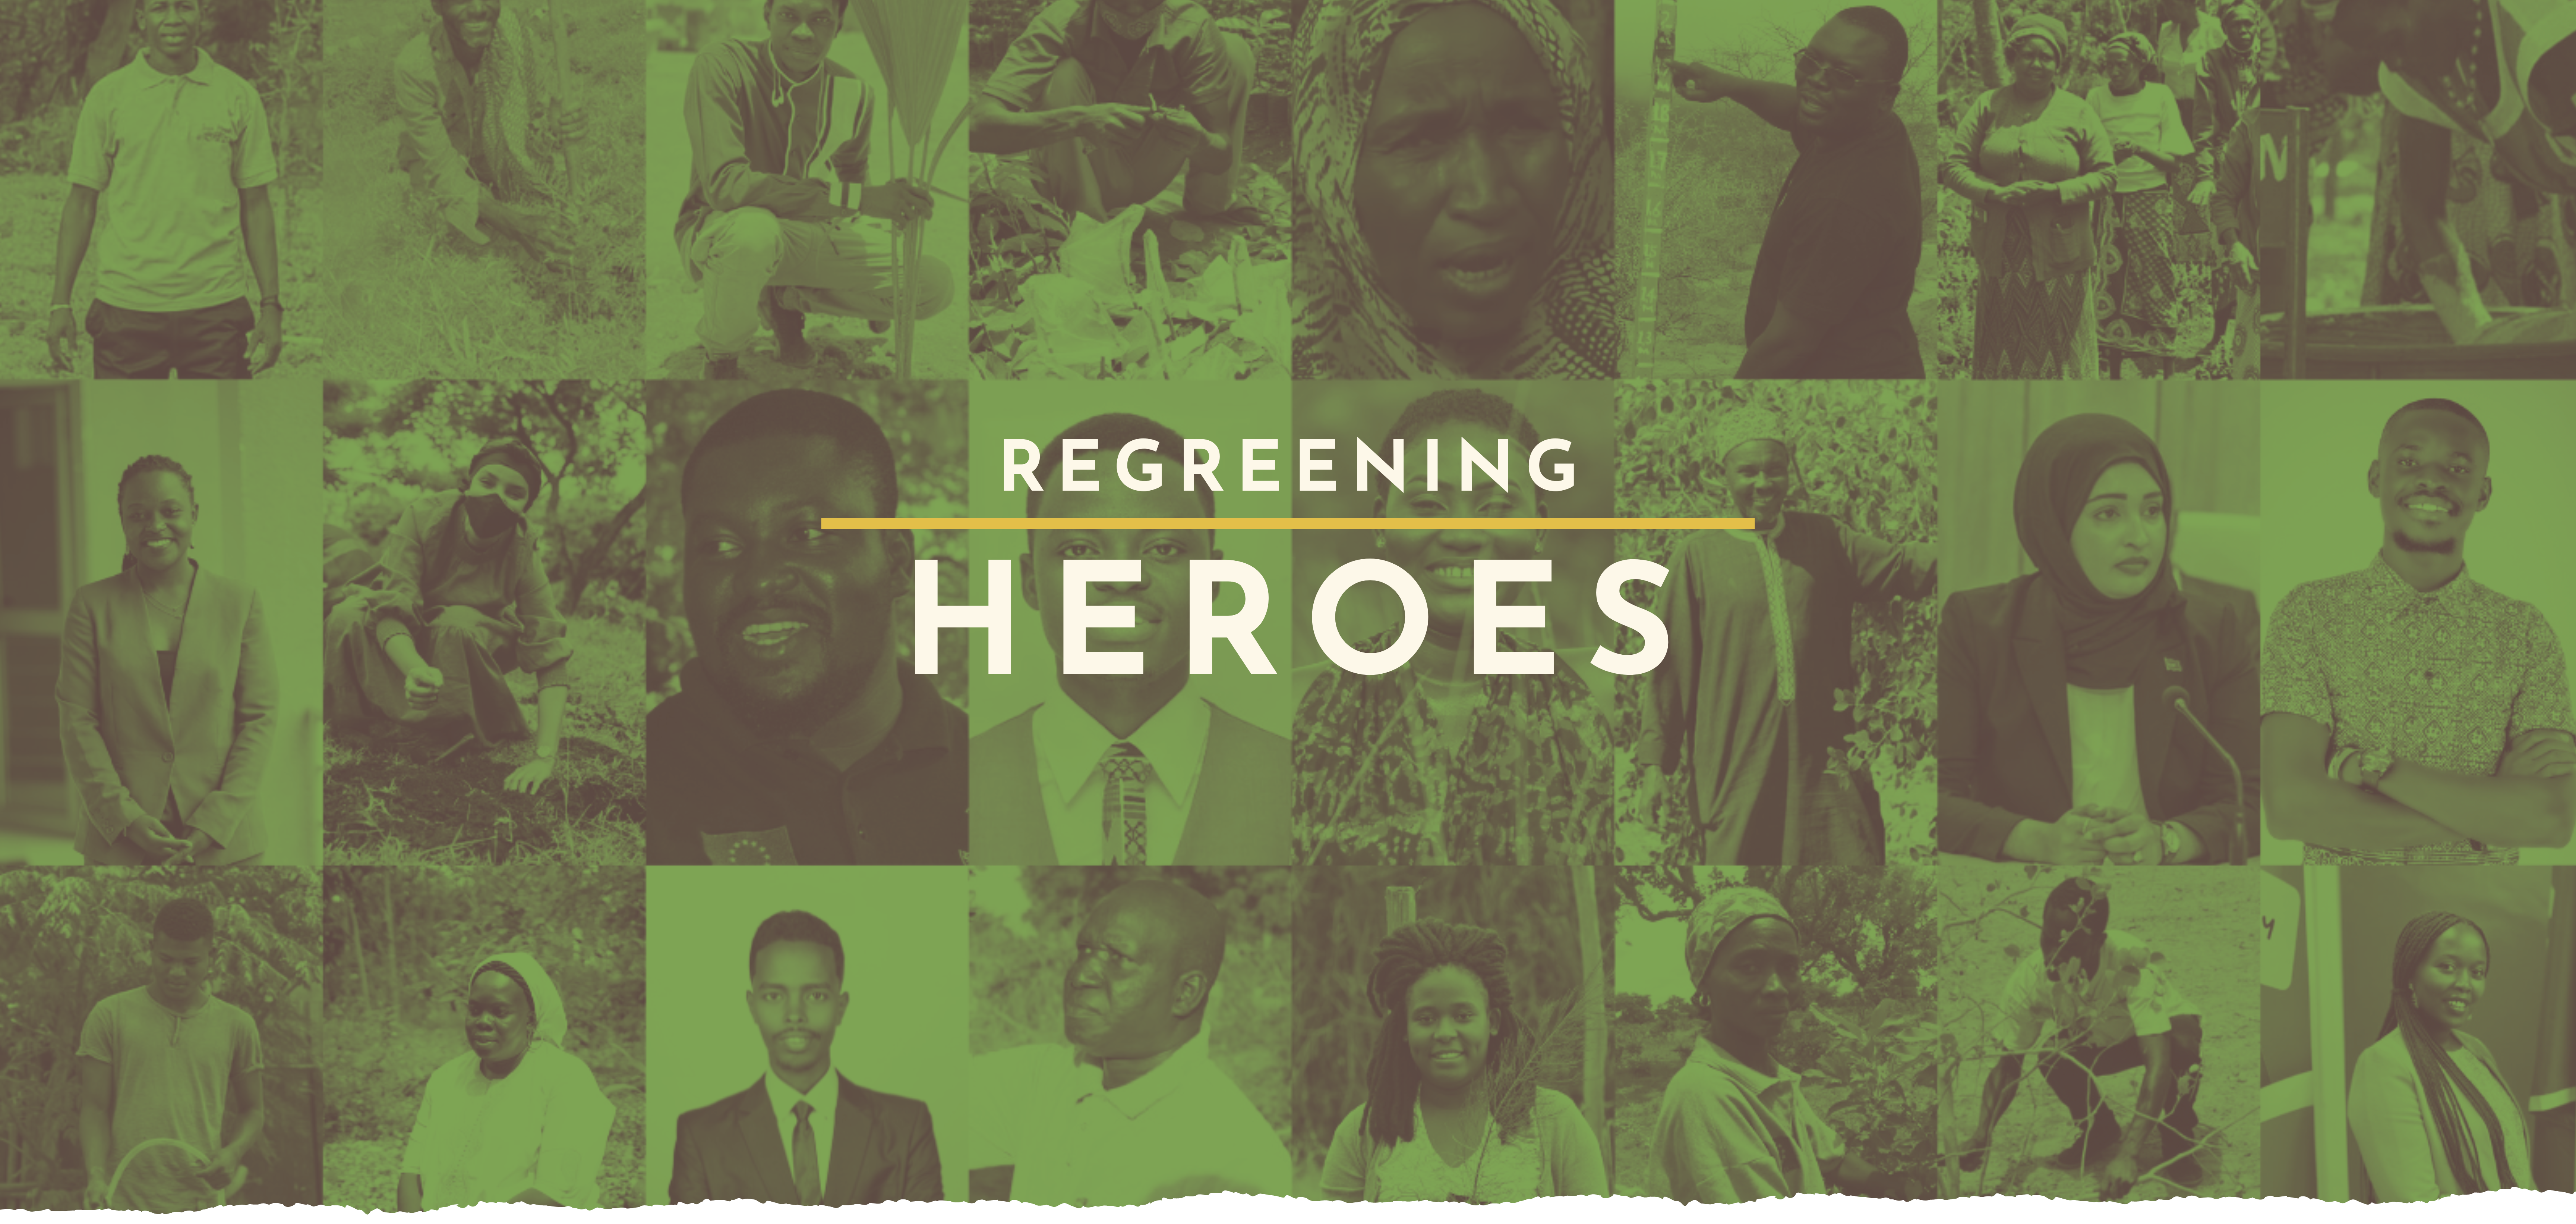 Honouring those who use their knowledge, resources, and passion to restore our landscapes and improve lives in communities across Sub-Saharan Africa.